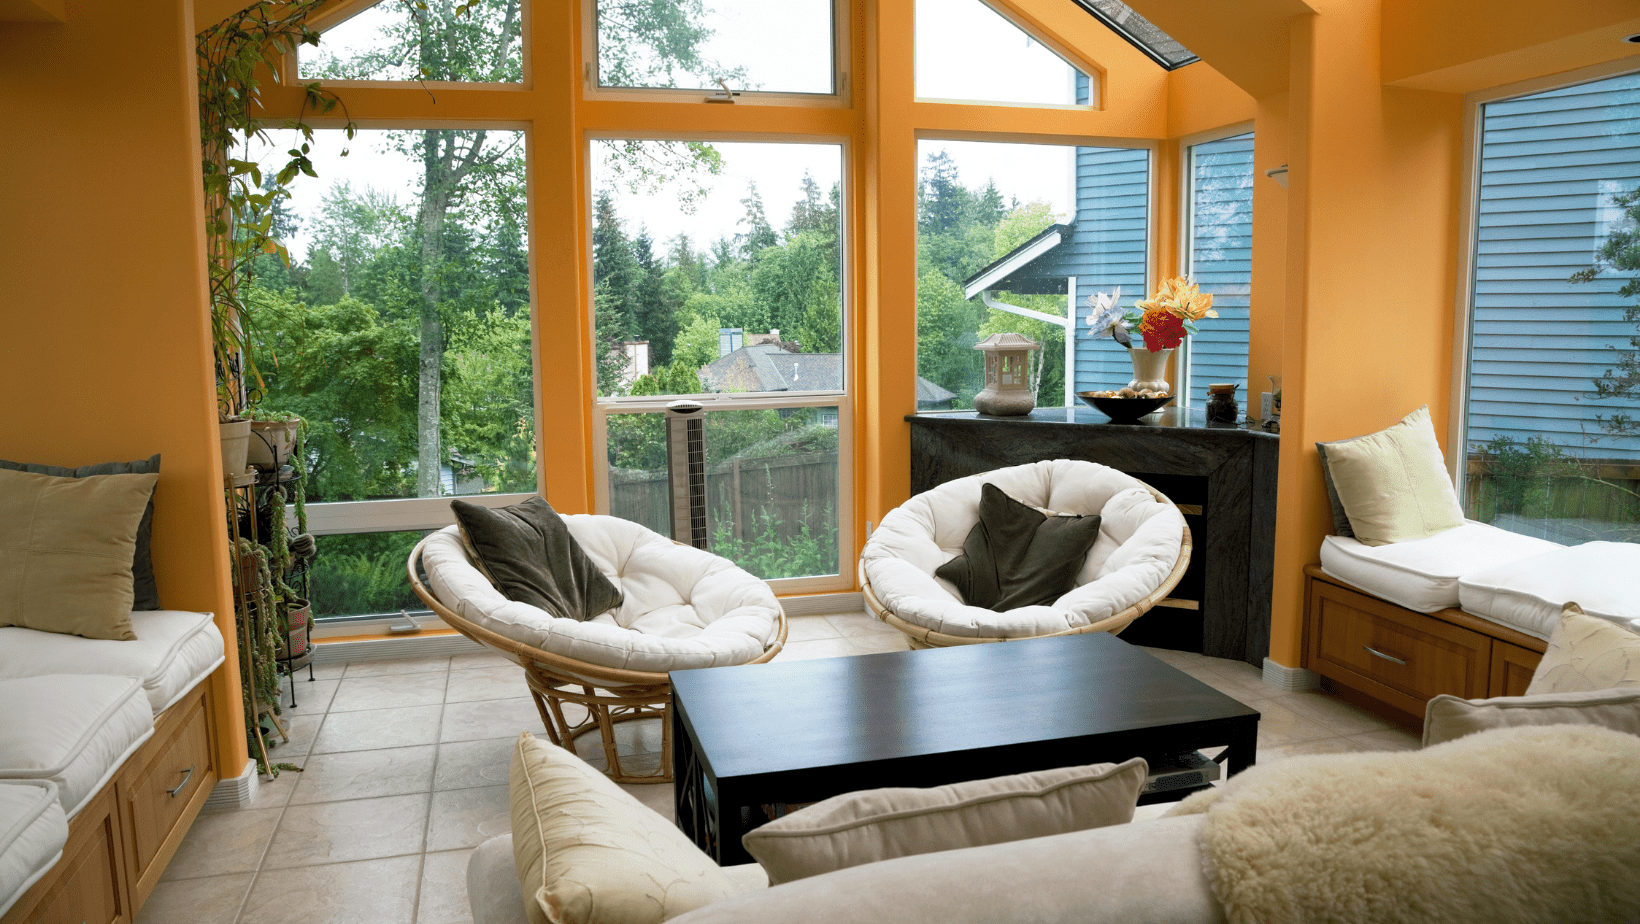 Read more about the article Enjoy the sunlight inside the home with Sunroom Contractors: A&M fine construction